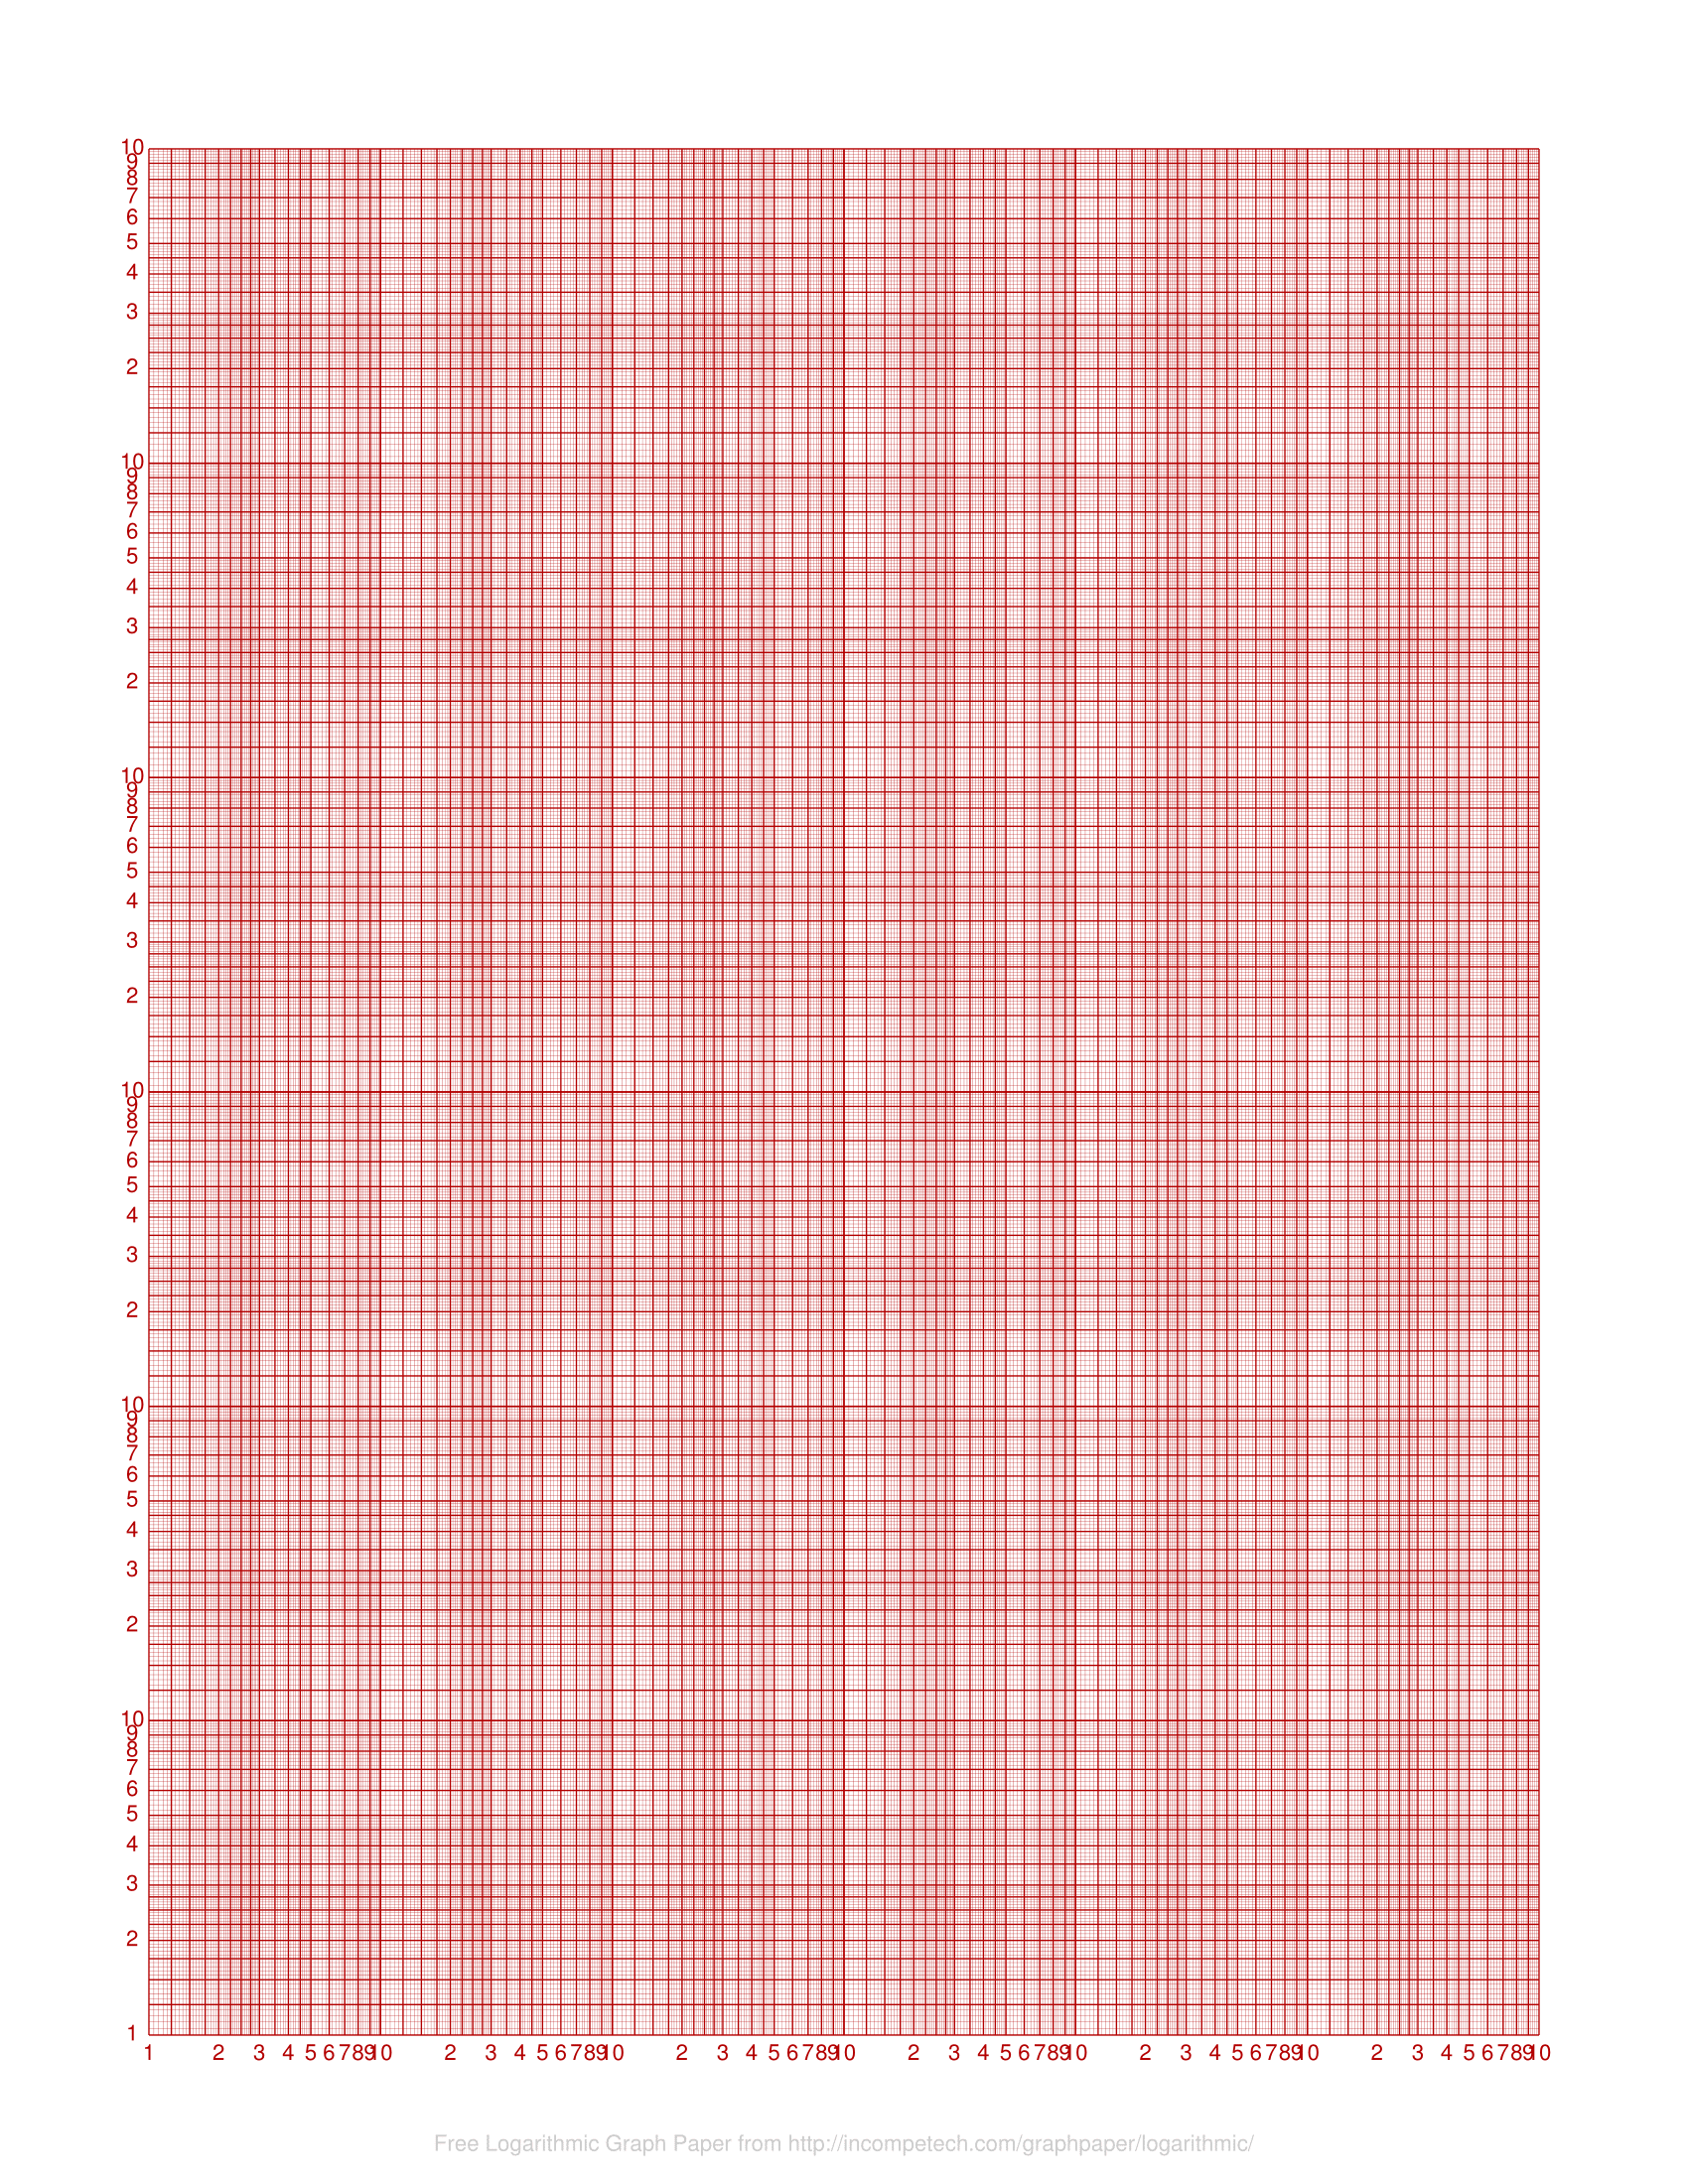 free online graph paper logarithmic